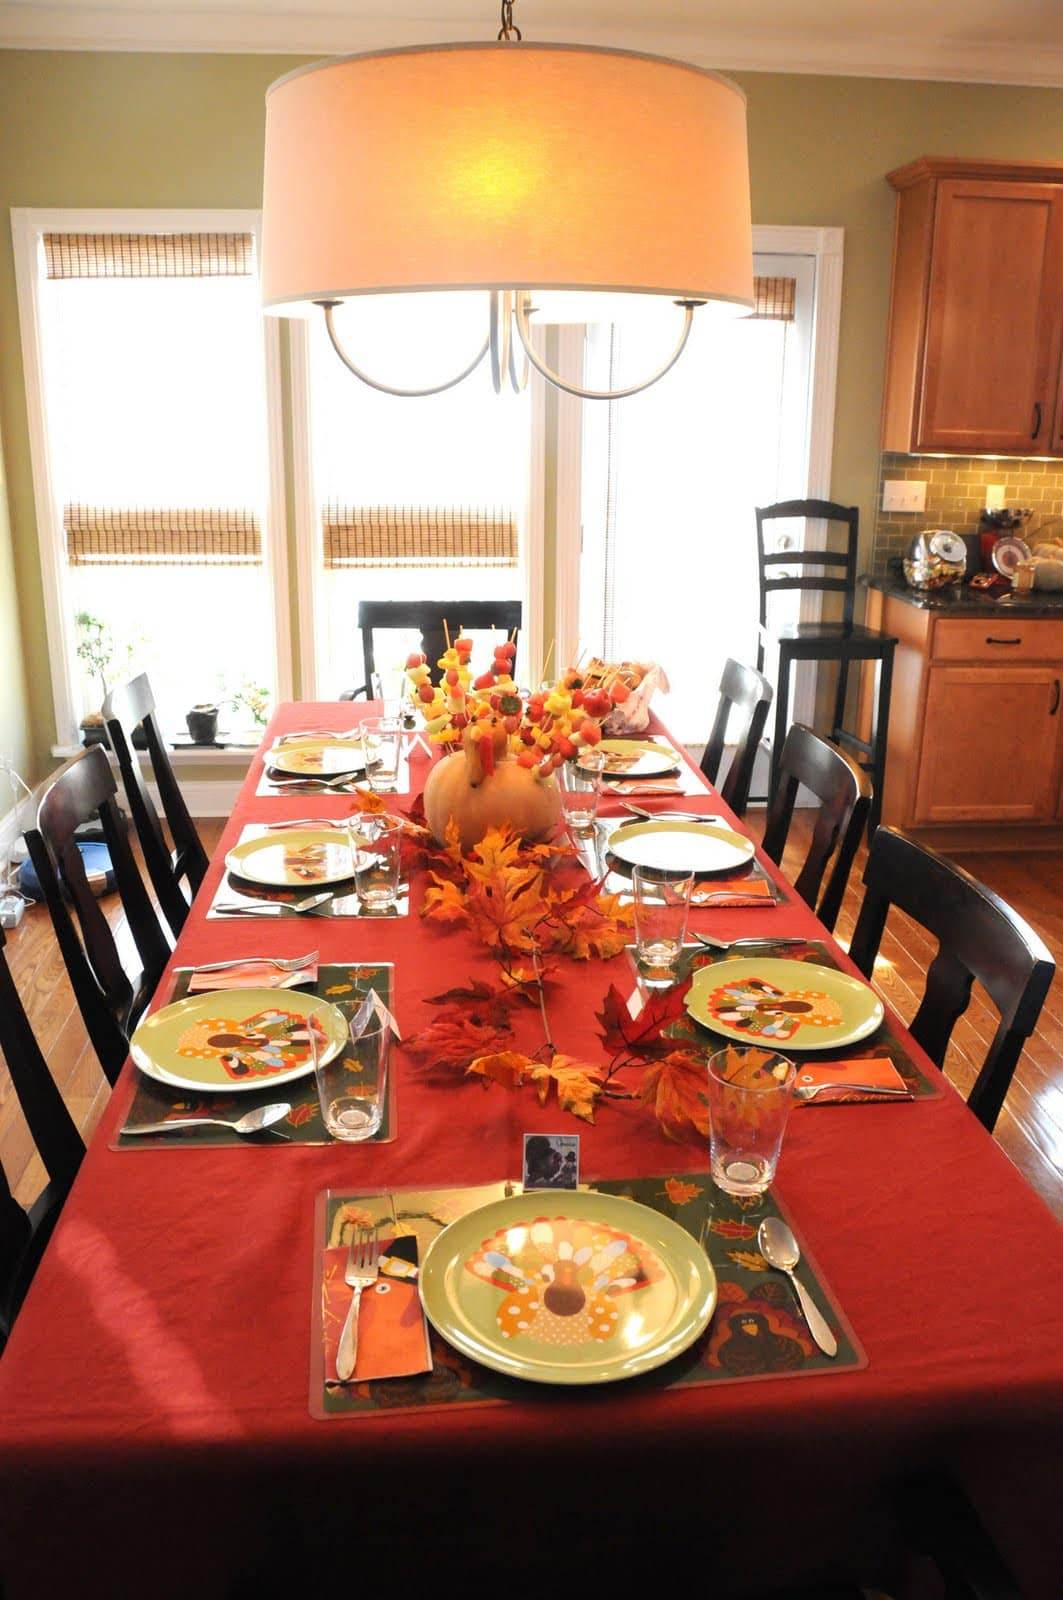 Thanksgiving Dinner Table Decorations
 Thanksgiving Decor The Polkadot Chair